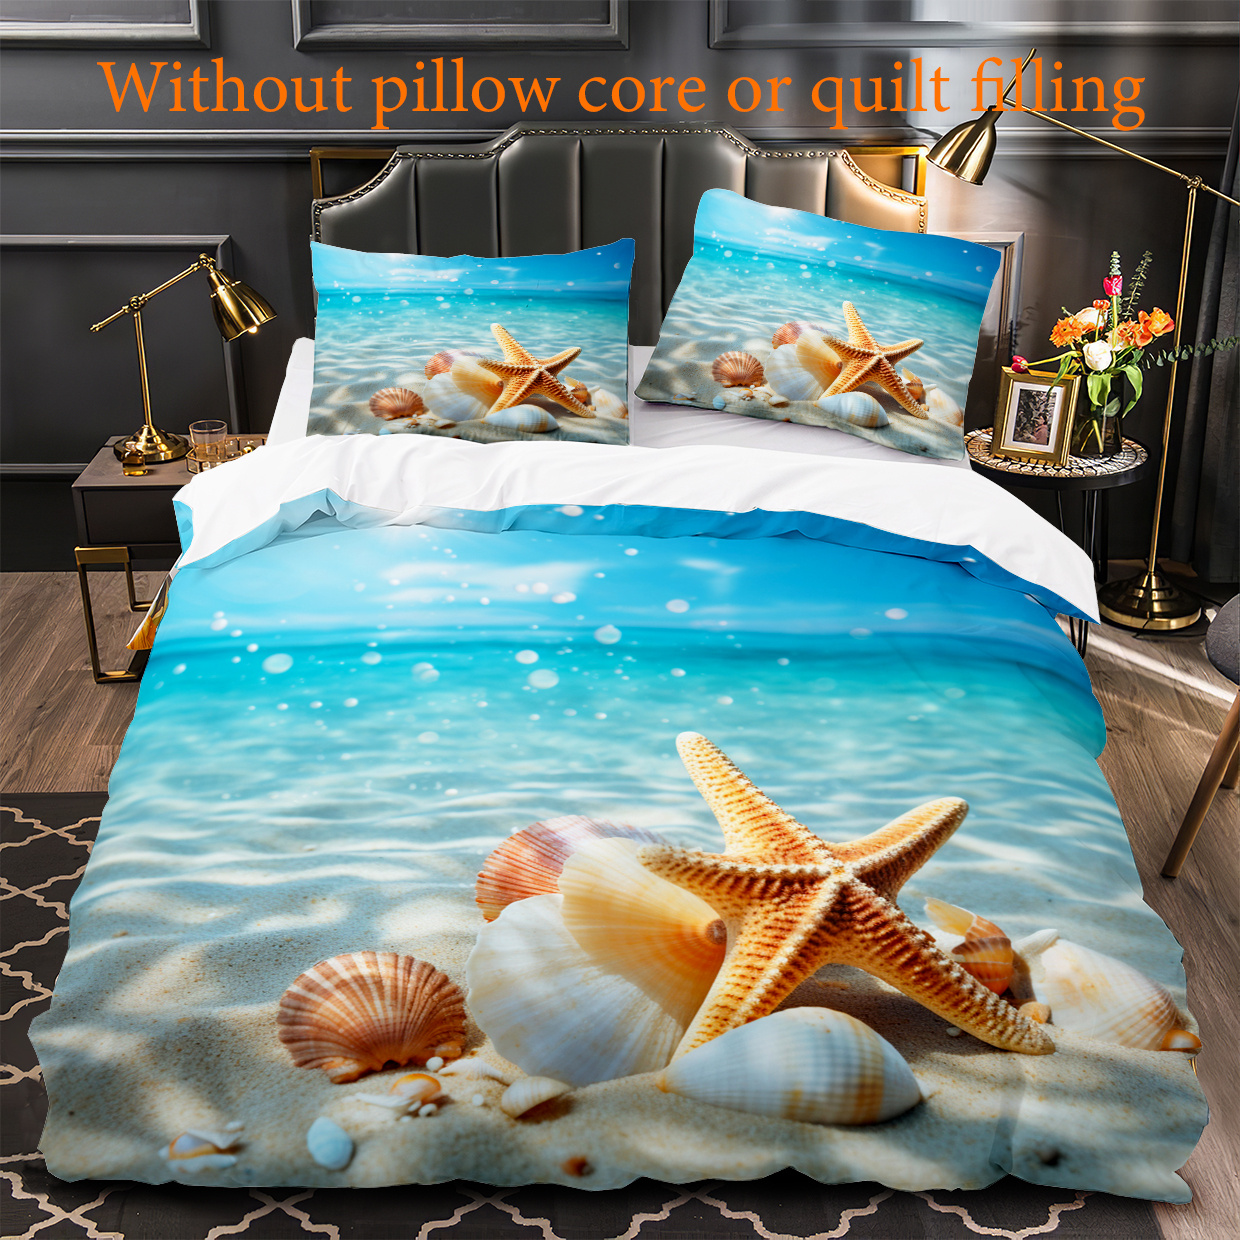 AESTHETIC BEDDING SETS: Bed Sheets, Duvet Covers & Pillow Cases